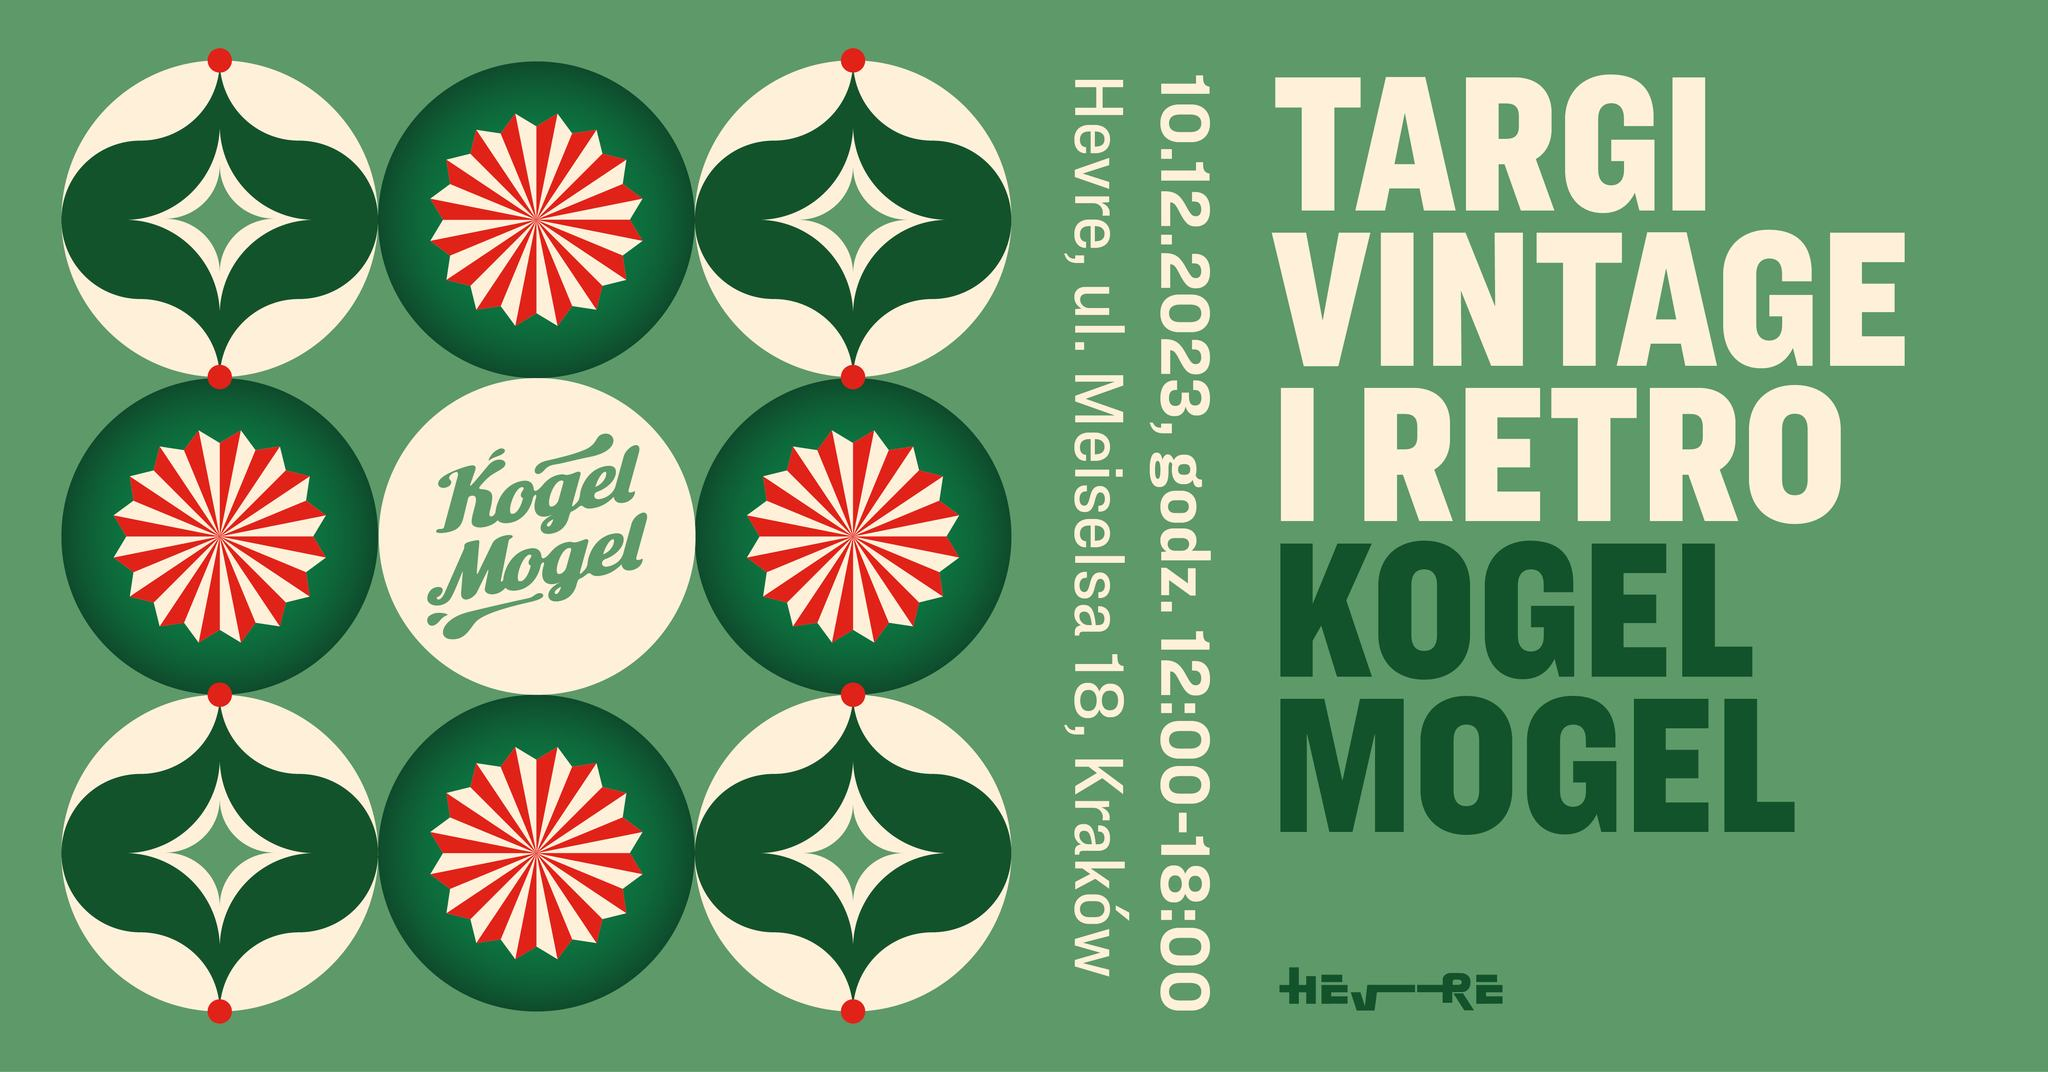 A poster stand at the Kogel Mogel Vintage and Retro Fair / 10 December